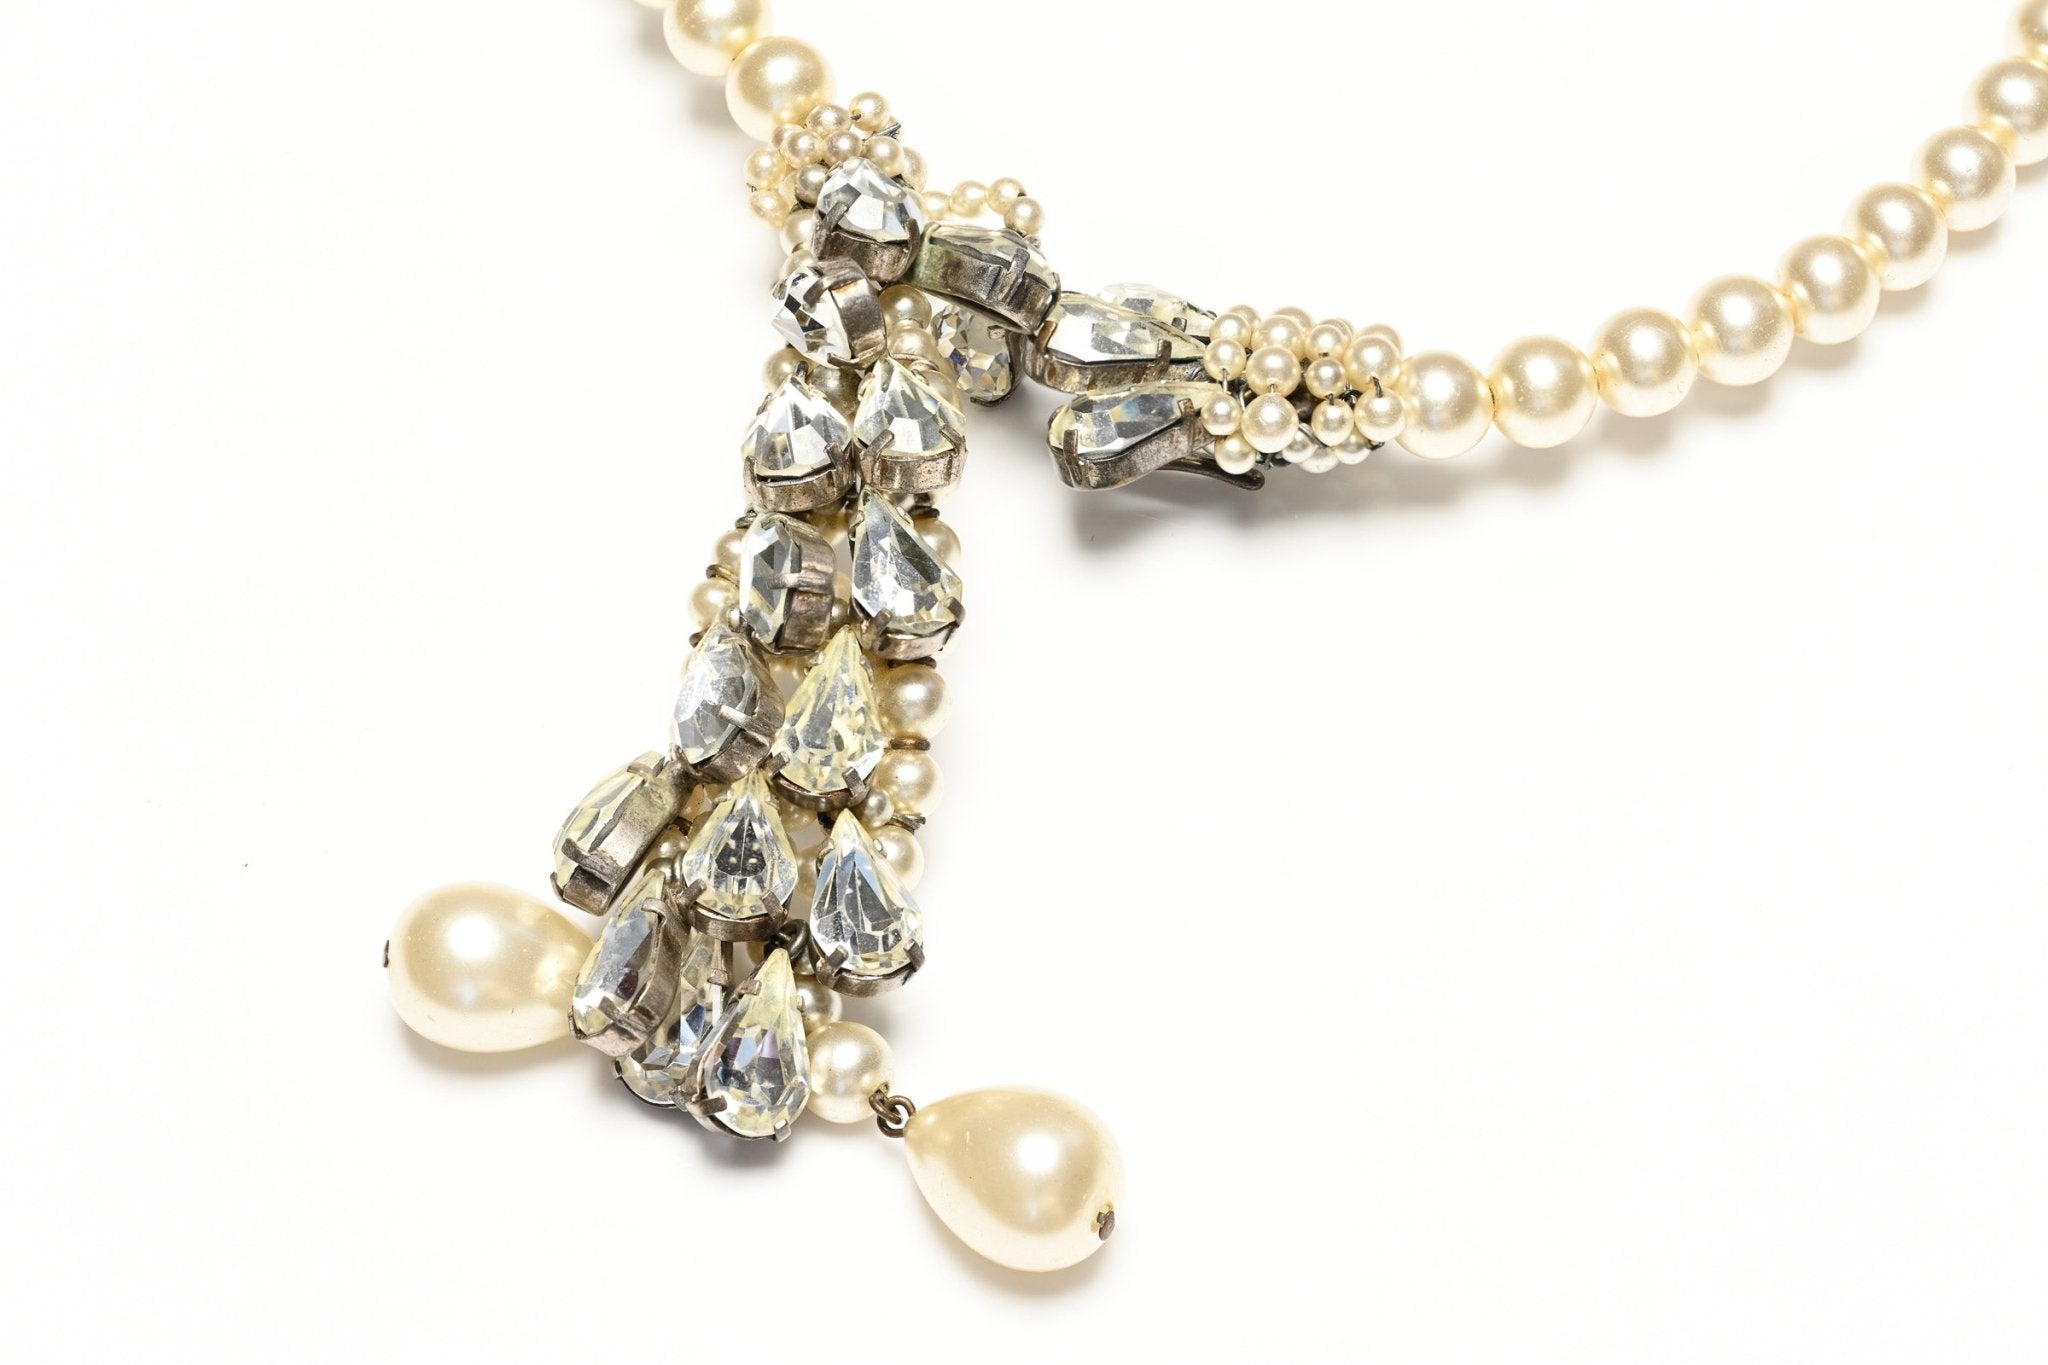 Christian Dior 1950's Haute Couture Roger Scemama Pearl Crystal Collar Necklace